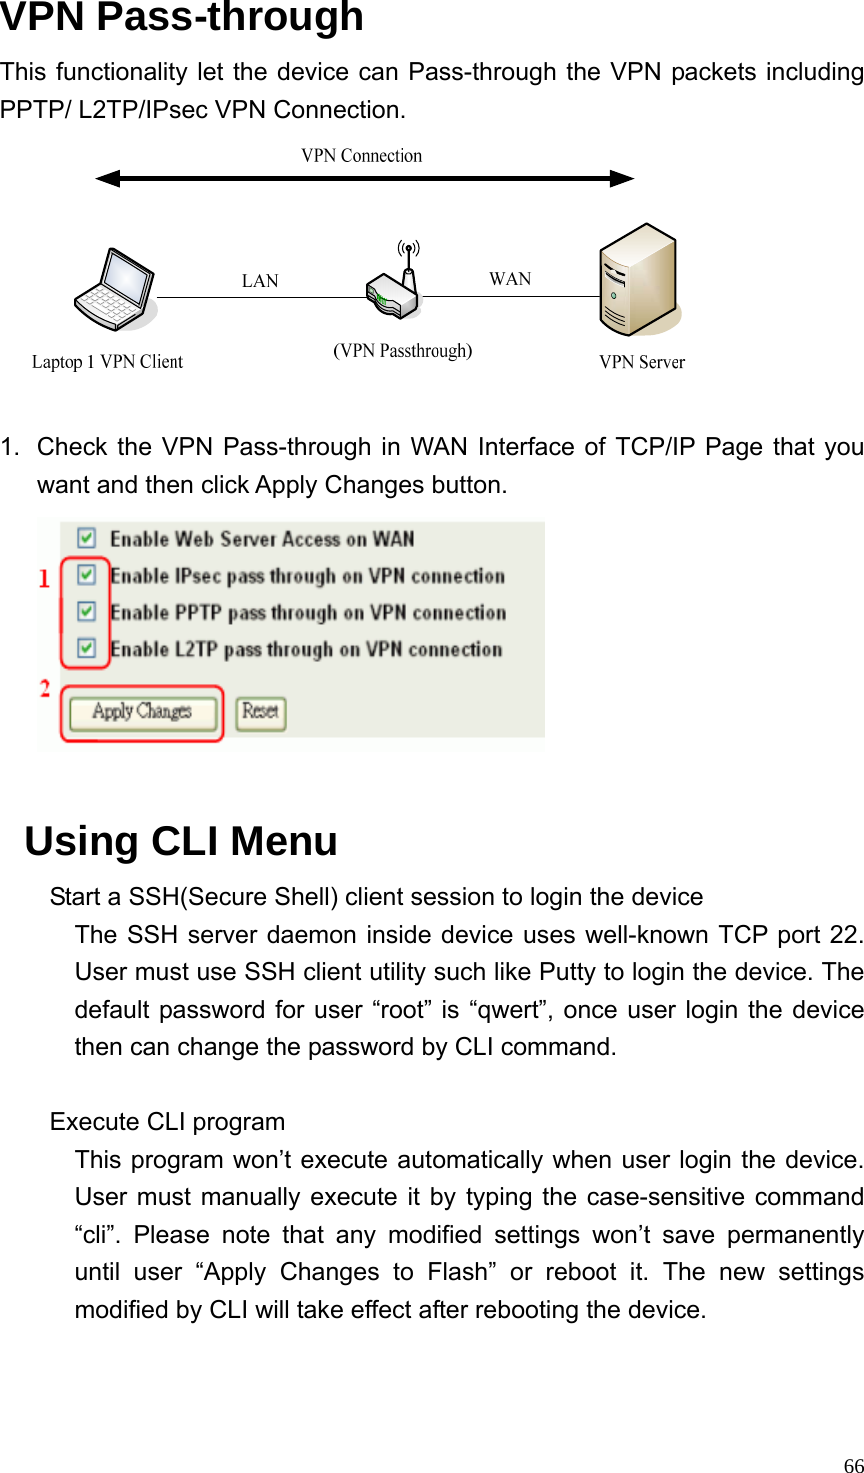  66VPN Pass-through This functionality let the device can Pass-through the VPN packets including PPTP/ L2TP/IPsec VPN Connection.   1.  Check the VPN Pass-through in WAN Interface of TCP/IP Page that you want and then click Apply Changes button.   Using CLI Menu Start a SSH(Secure Shell) client session to login the device The SSH server daemon inside device uses well-known TCP port 22. User must use SSH client utility such like Putty to login the device. The default password for user “root” is “qwert”, once user login the device then can change the password by CLI command.  Execute CLI program This program won’t execute automatically when user login the device. User must manually execute it by typing the case-sensitive command “cli”. Please note that any modified settings won’t save permanently until user “Apply Changes to Flash” or reboot it. The new settings modified by CLI will take effect after rebooting the device.   